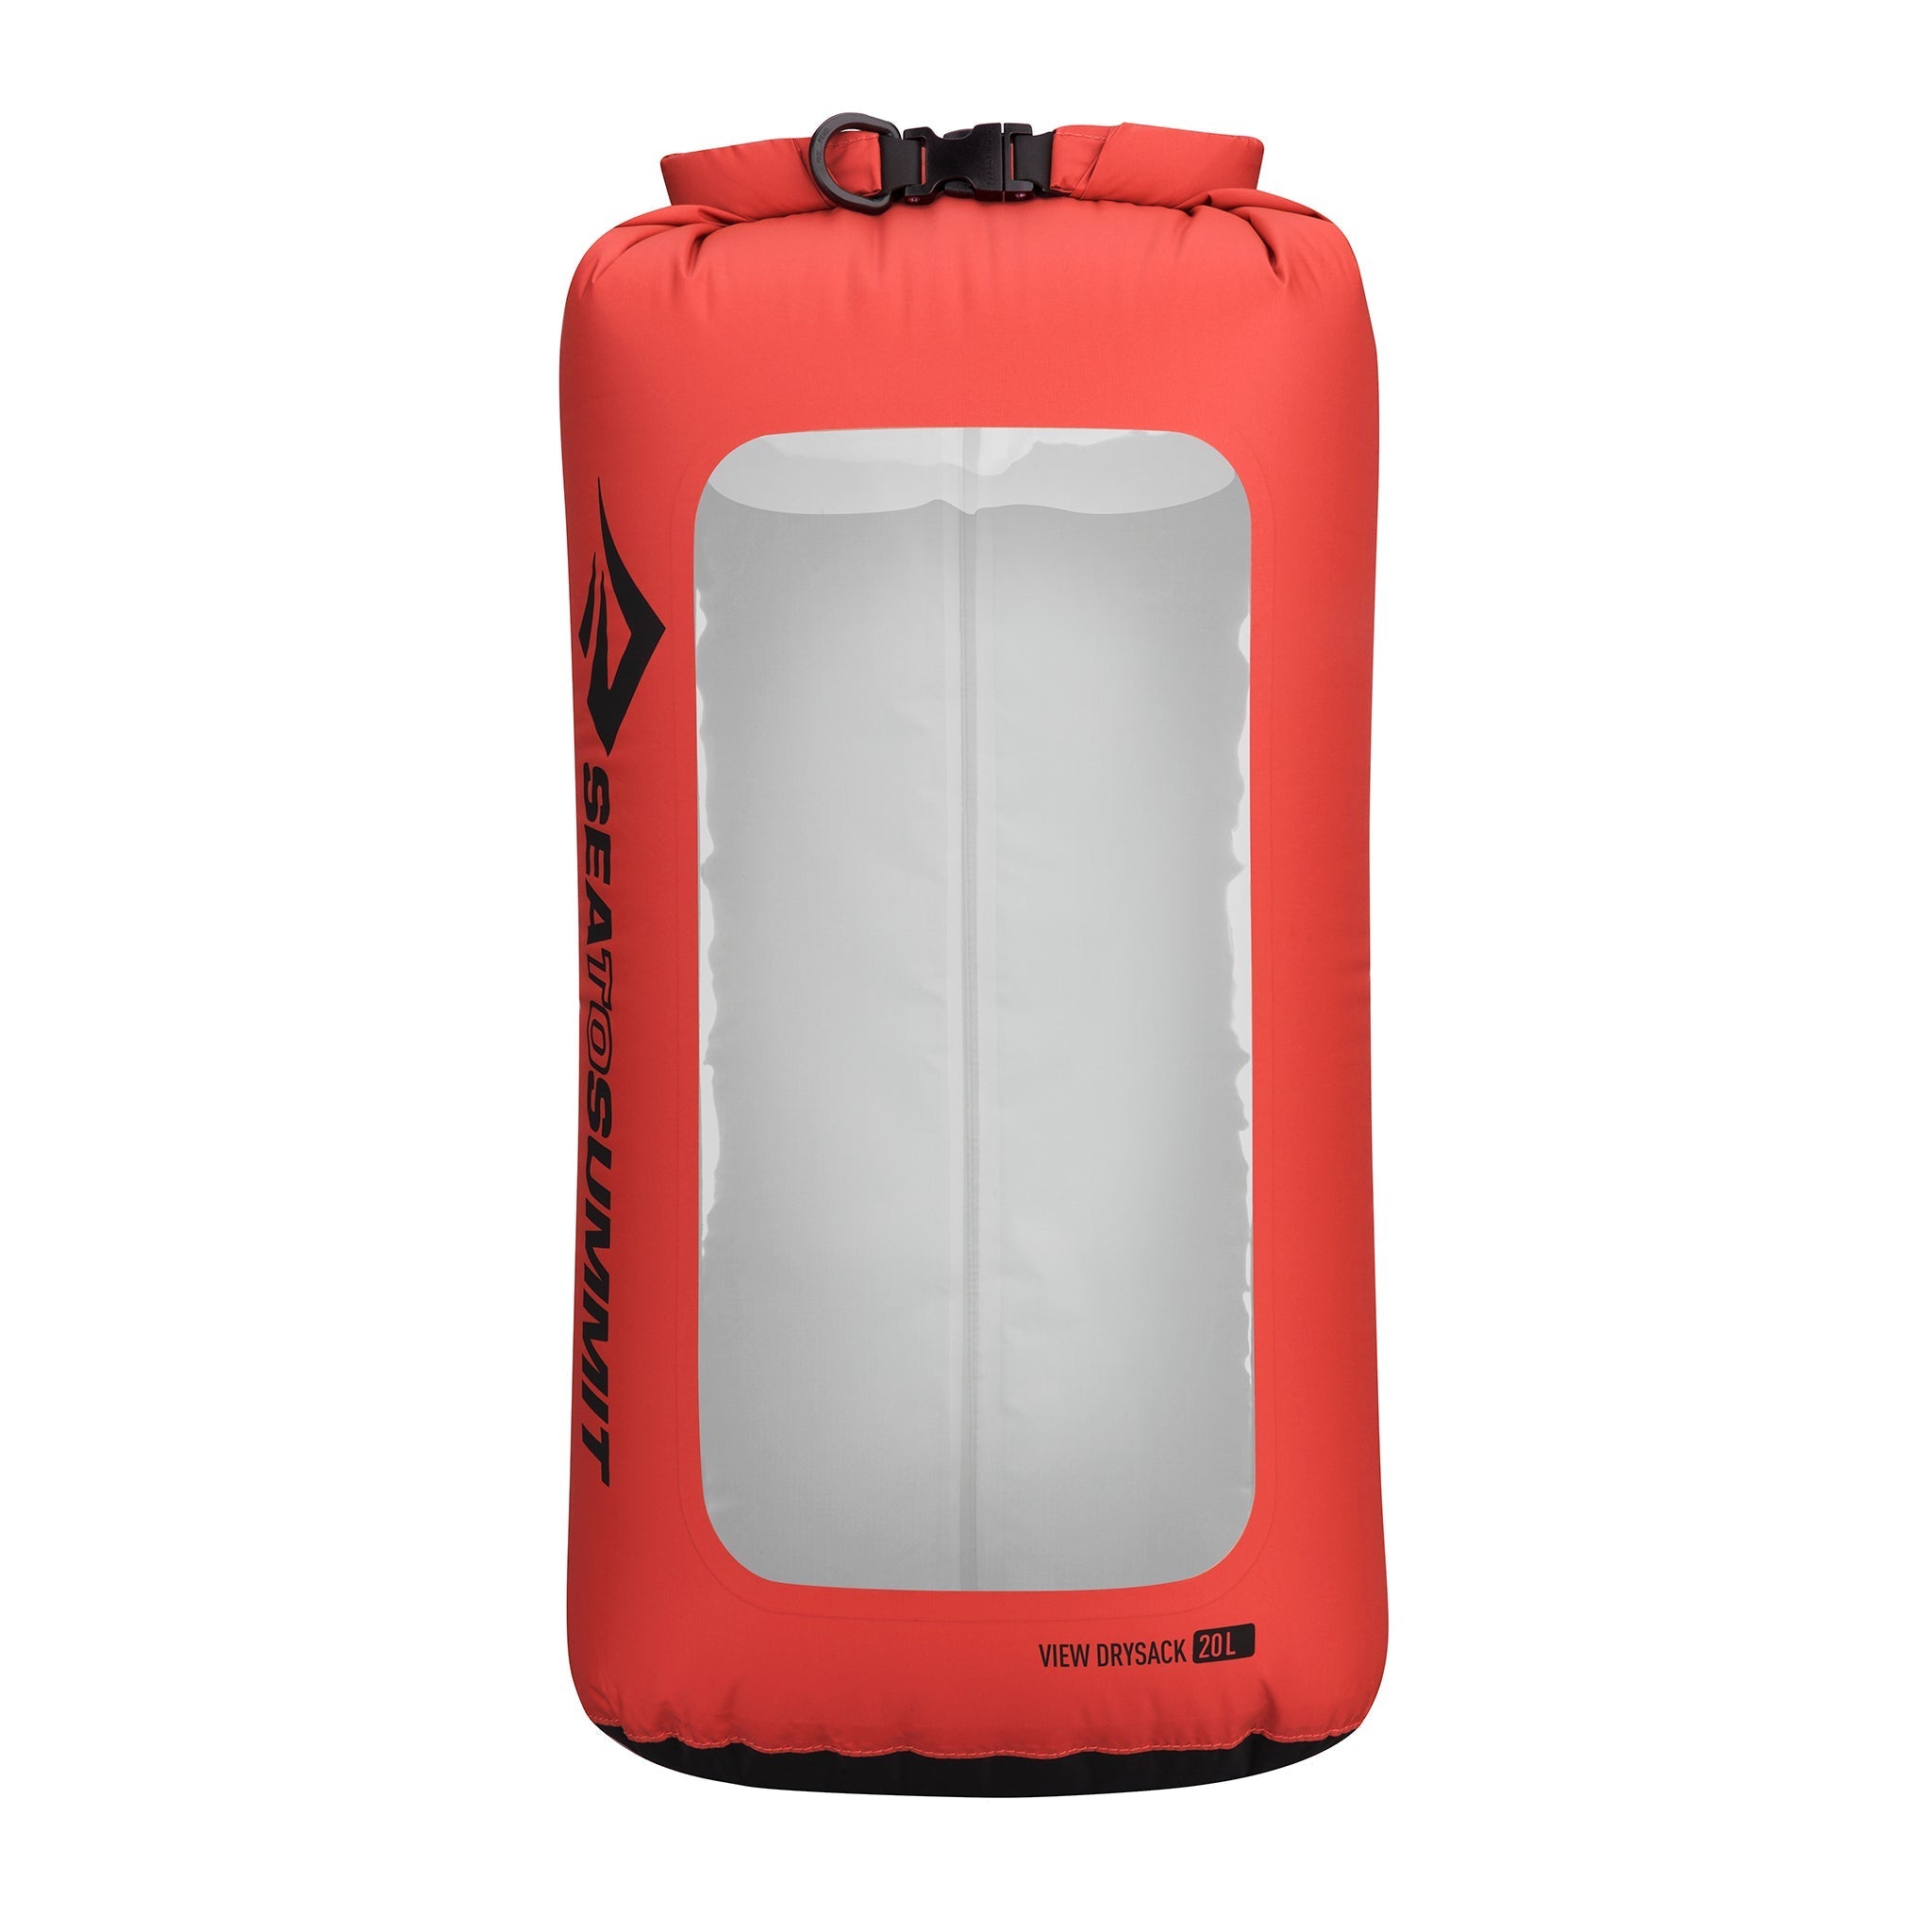 20 litre || Lightweight Dry Sack in Red